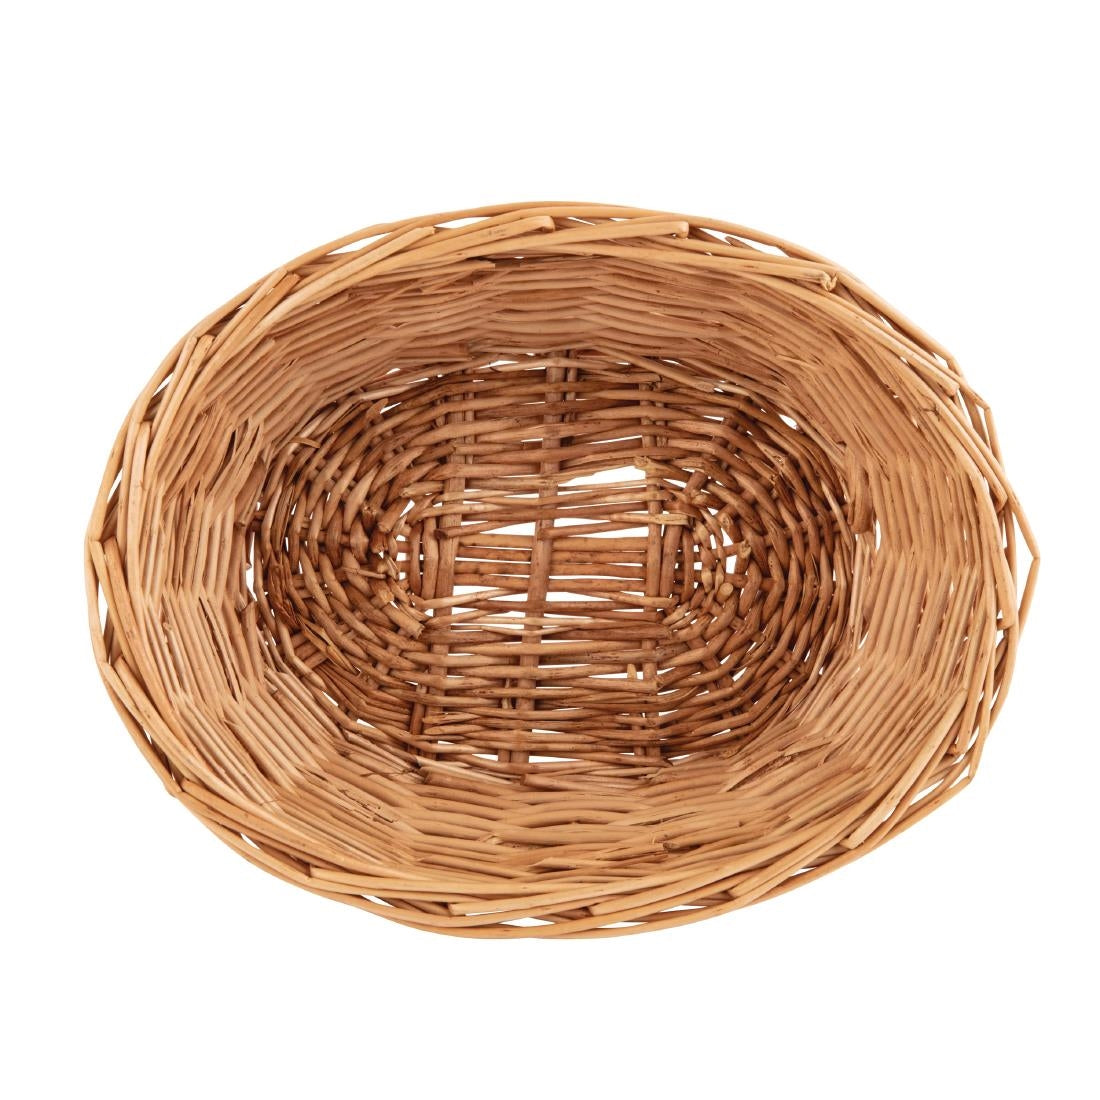 Willow Oval Basket